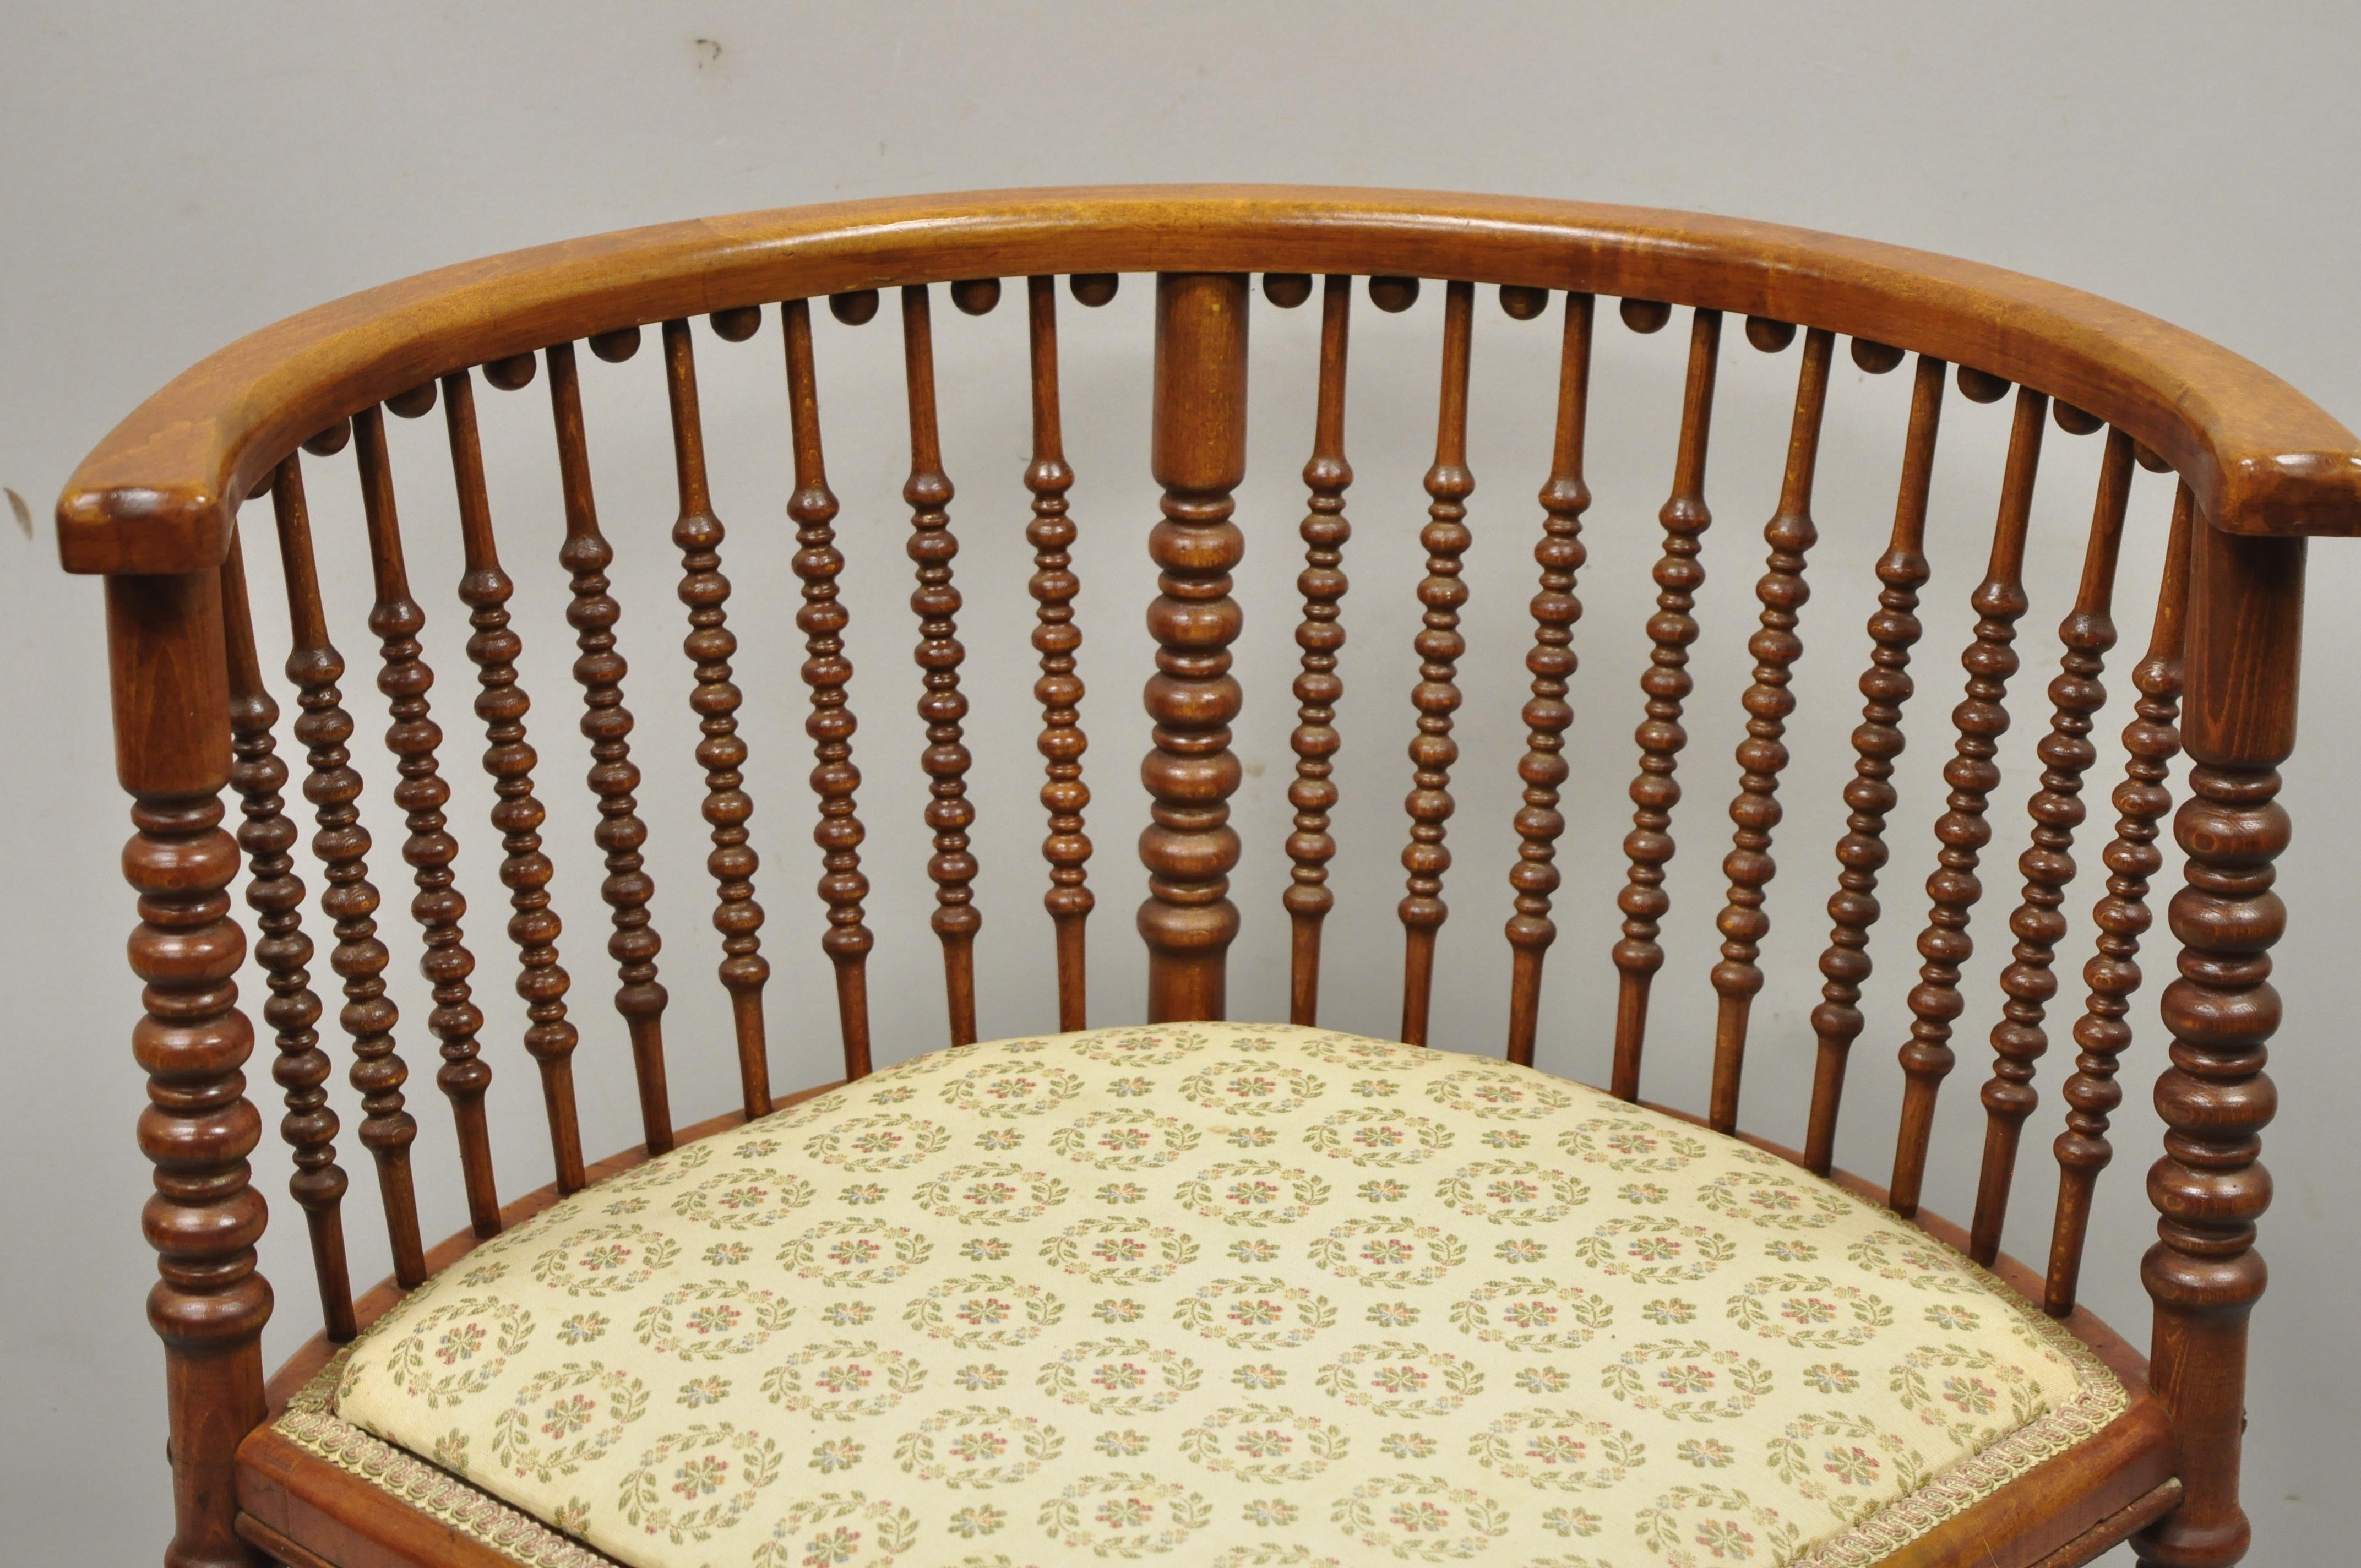 Antique Arts & Crafts spool carved corner chair bobbin chair stick and ball. Item features turn carved spindle frame, upholstered seat, very nice antique item, quality American craftsmanship, great style and form. Circa early 1900s. Measurements: